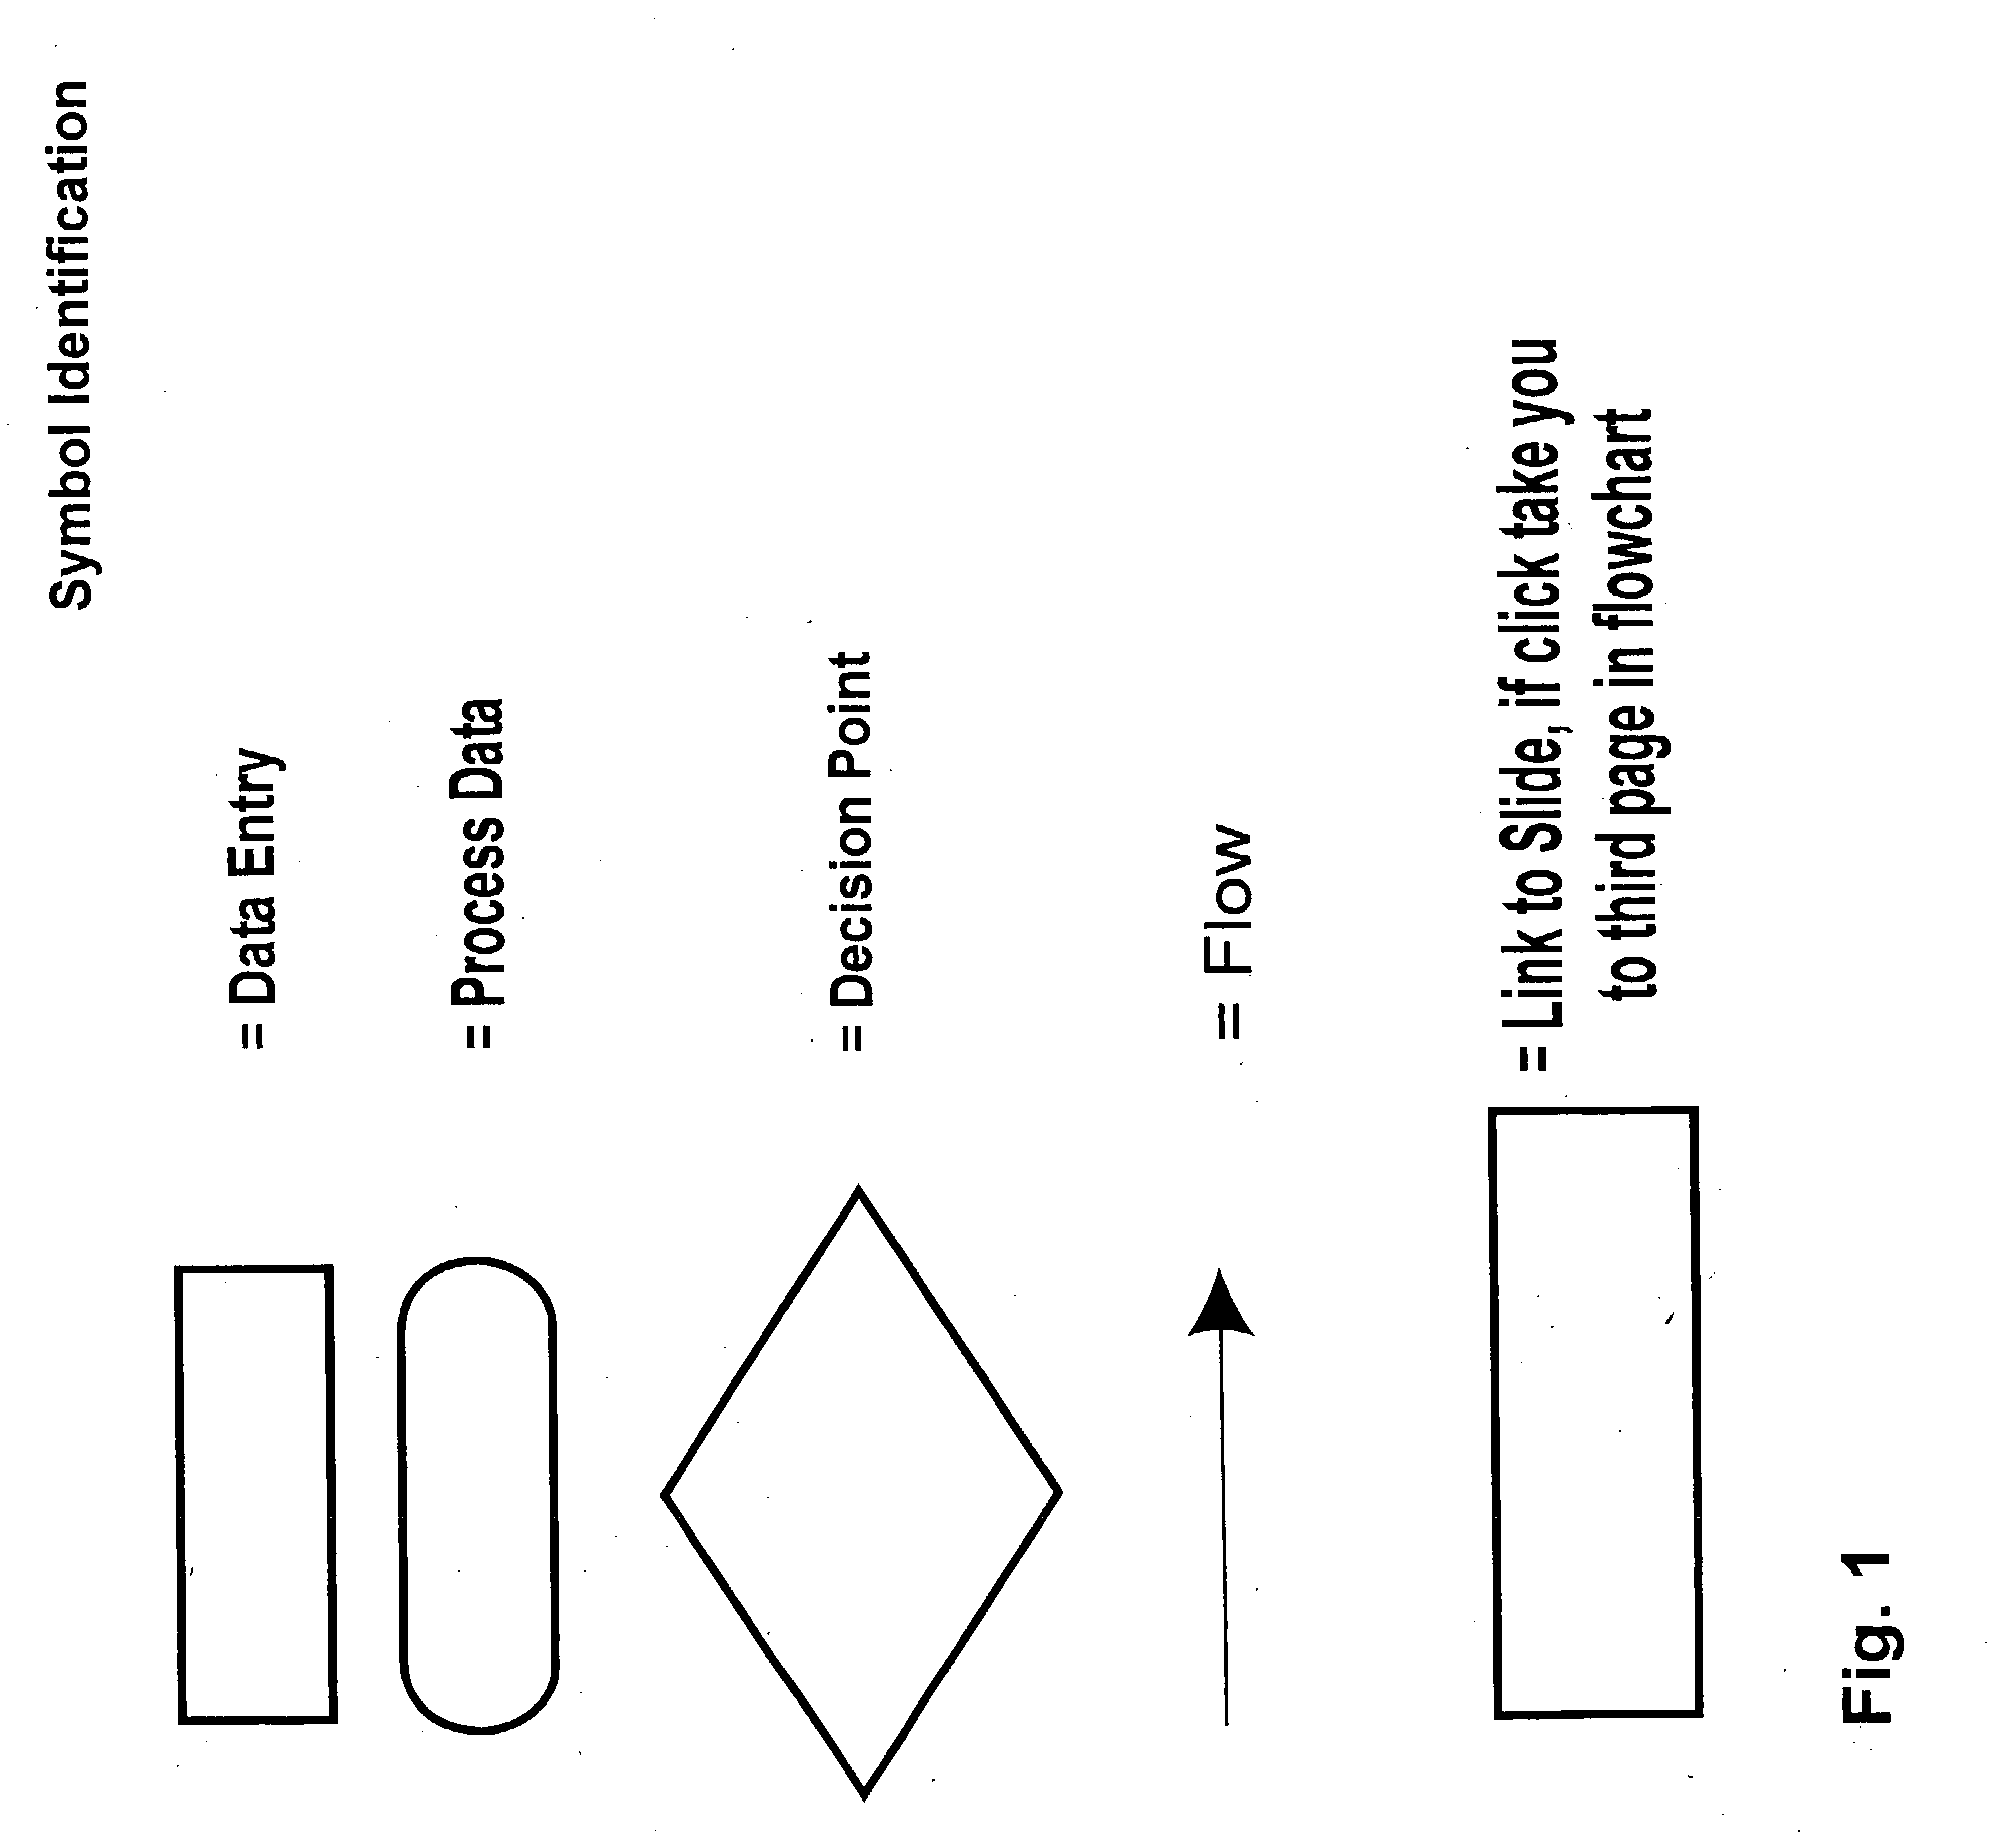 Algorithm and program for the handling and administration of radioactive pharmaceuticals